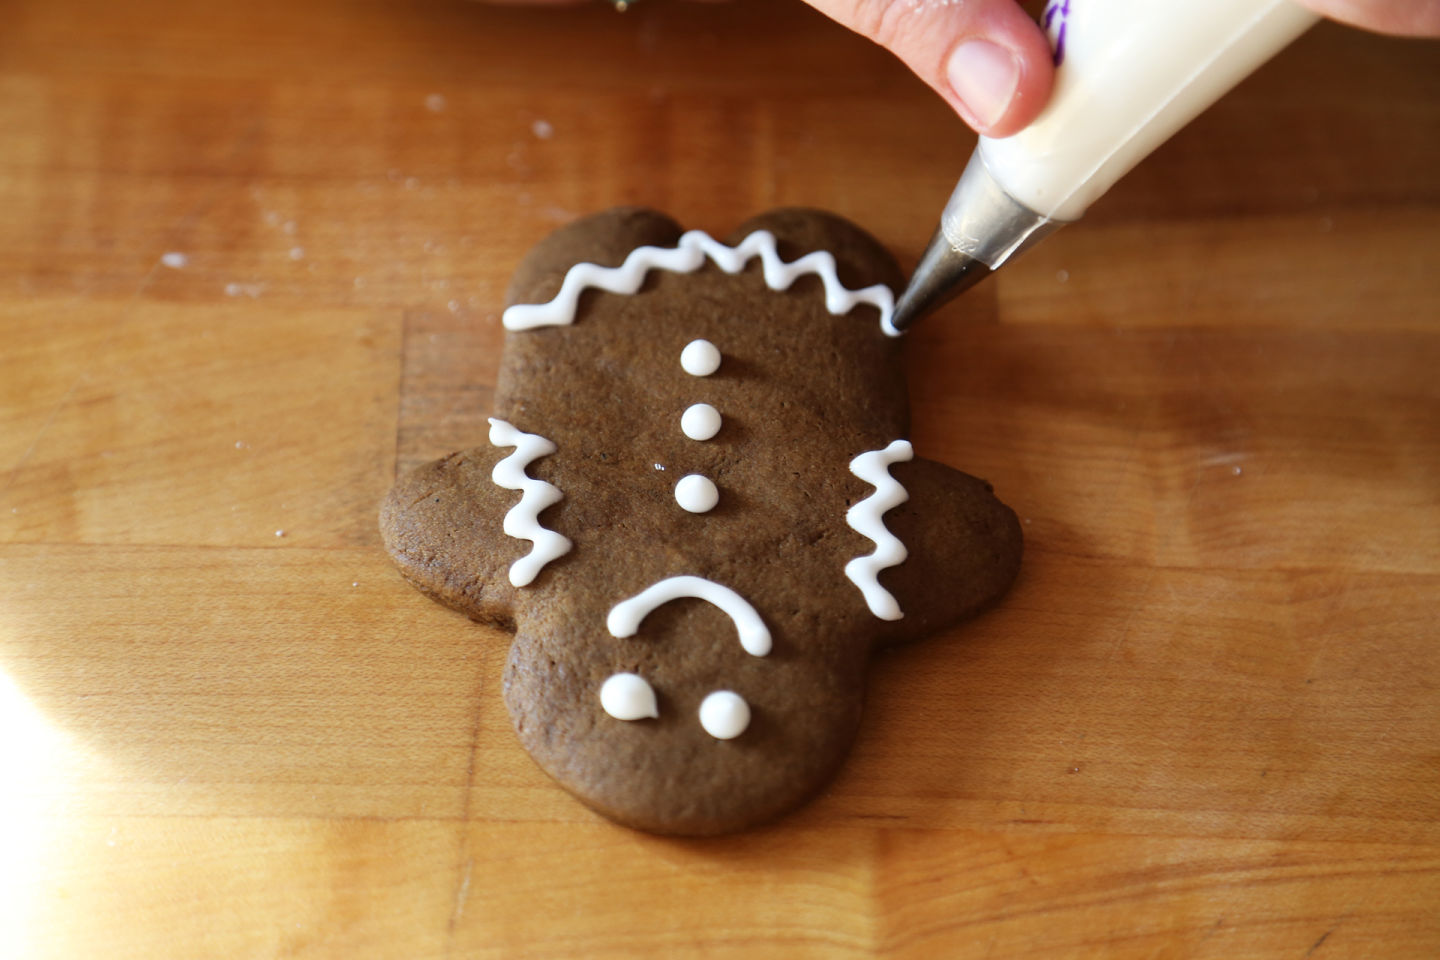 Decorating a gingerbread person with royal icing.  Wendy Goodfriend